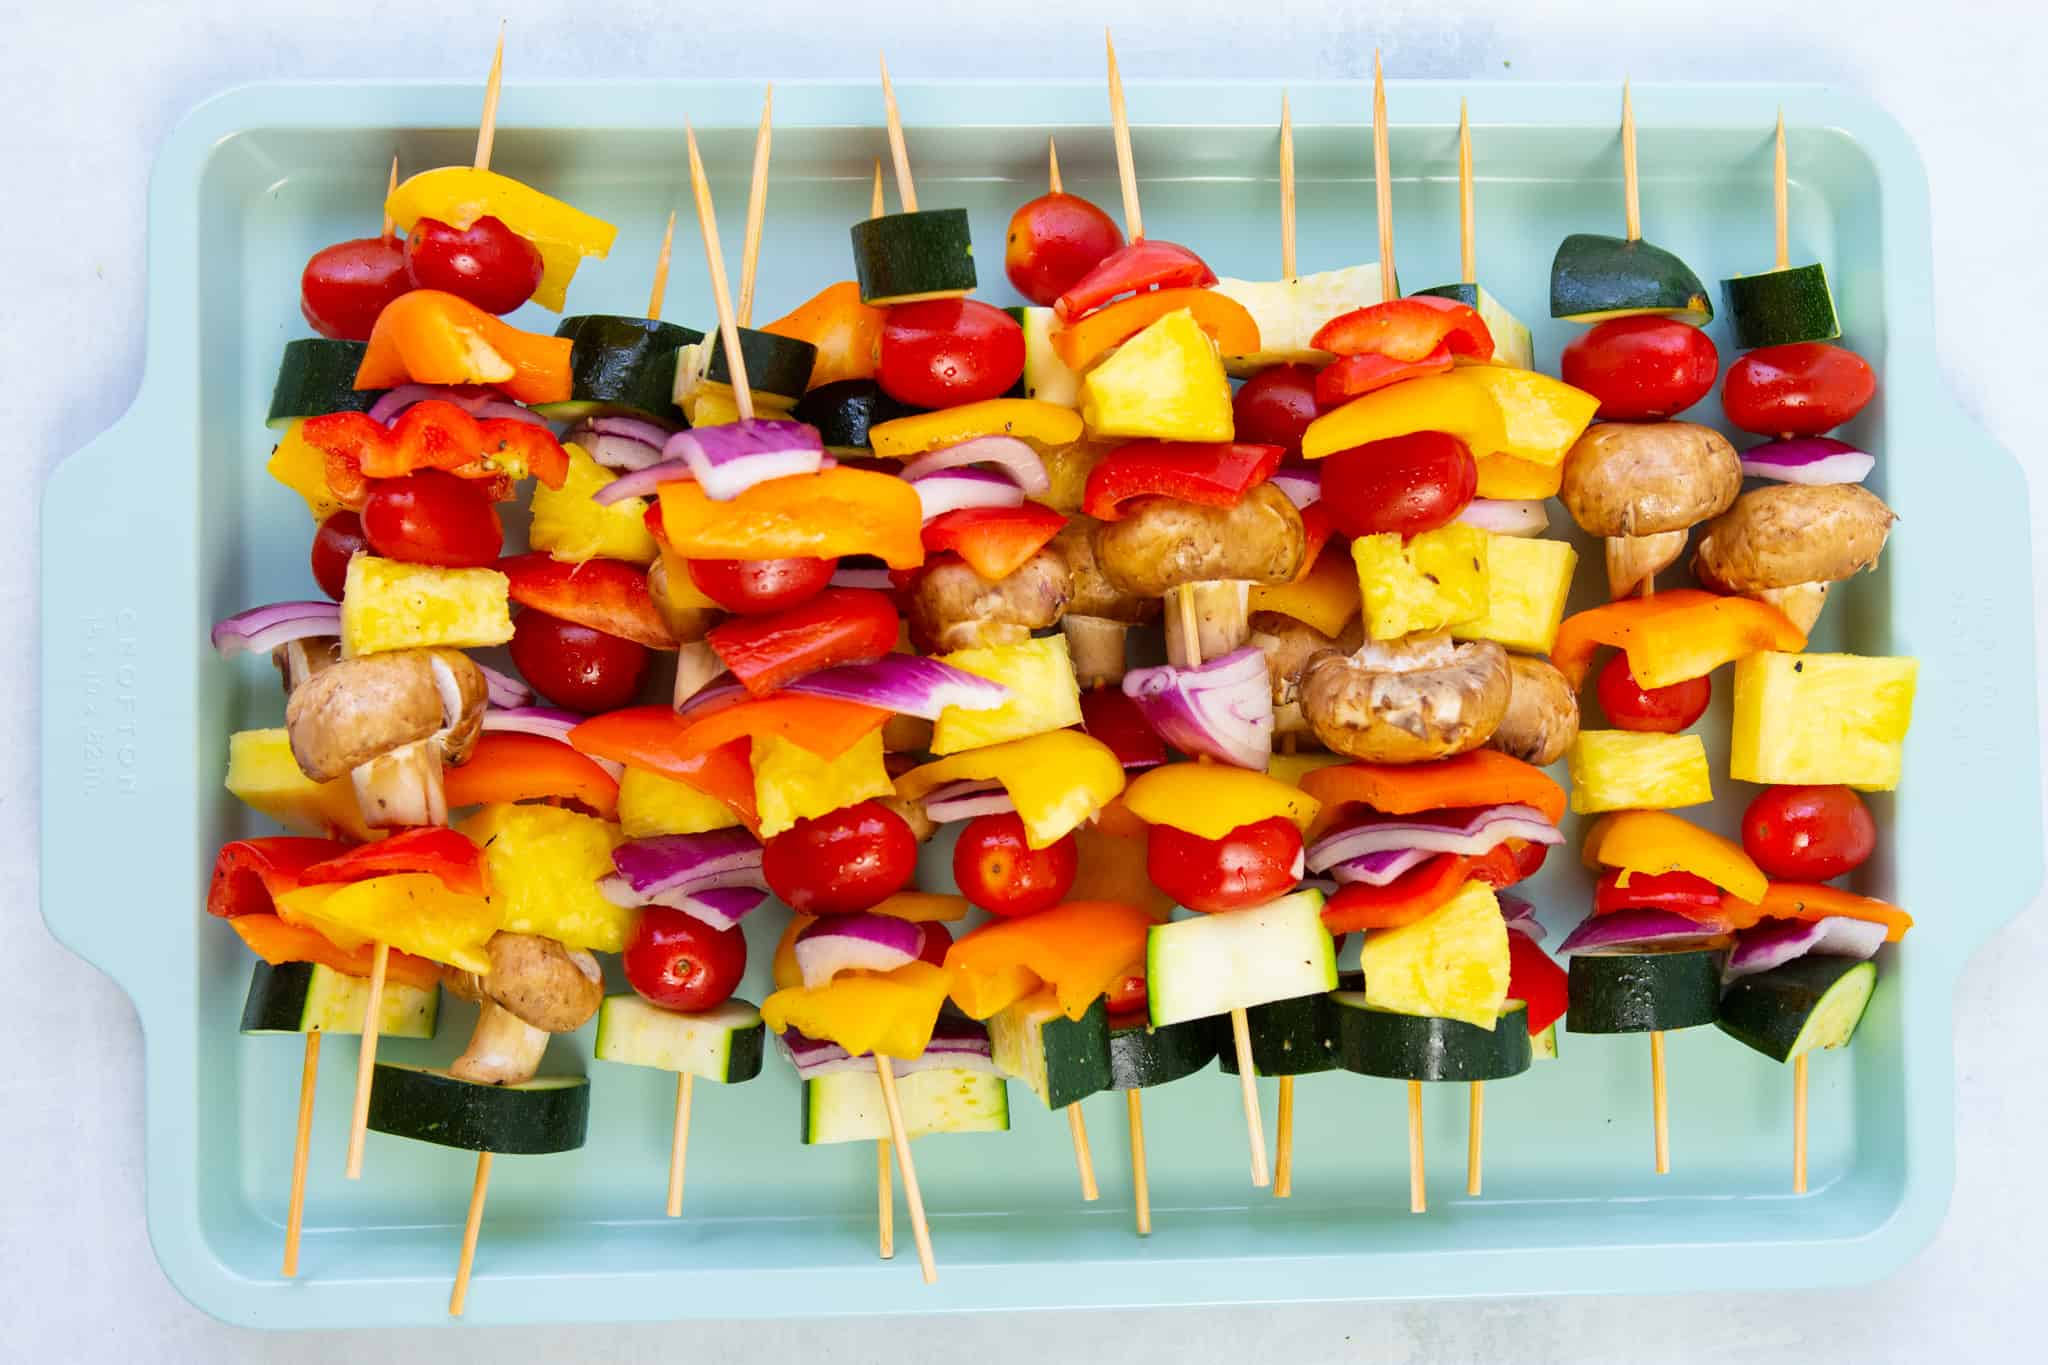 chopped onions, zucchini, mushrooms, peppers, pineapple, and tomatoes on wooden skewers ready to grill